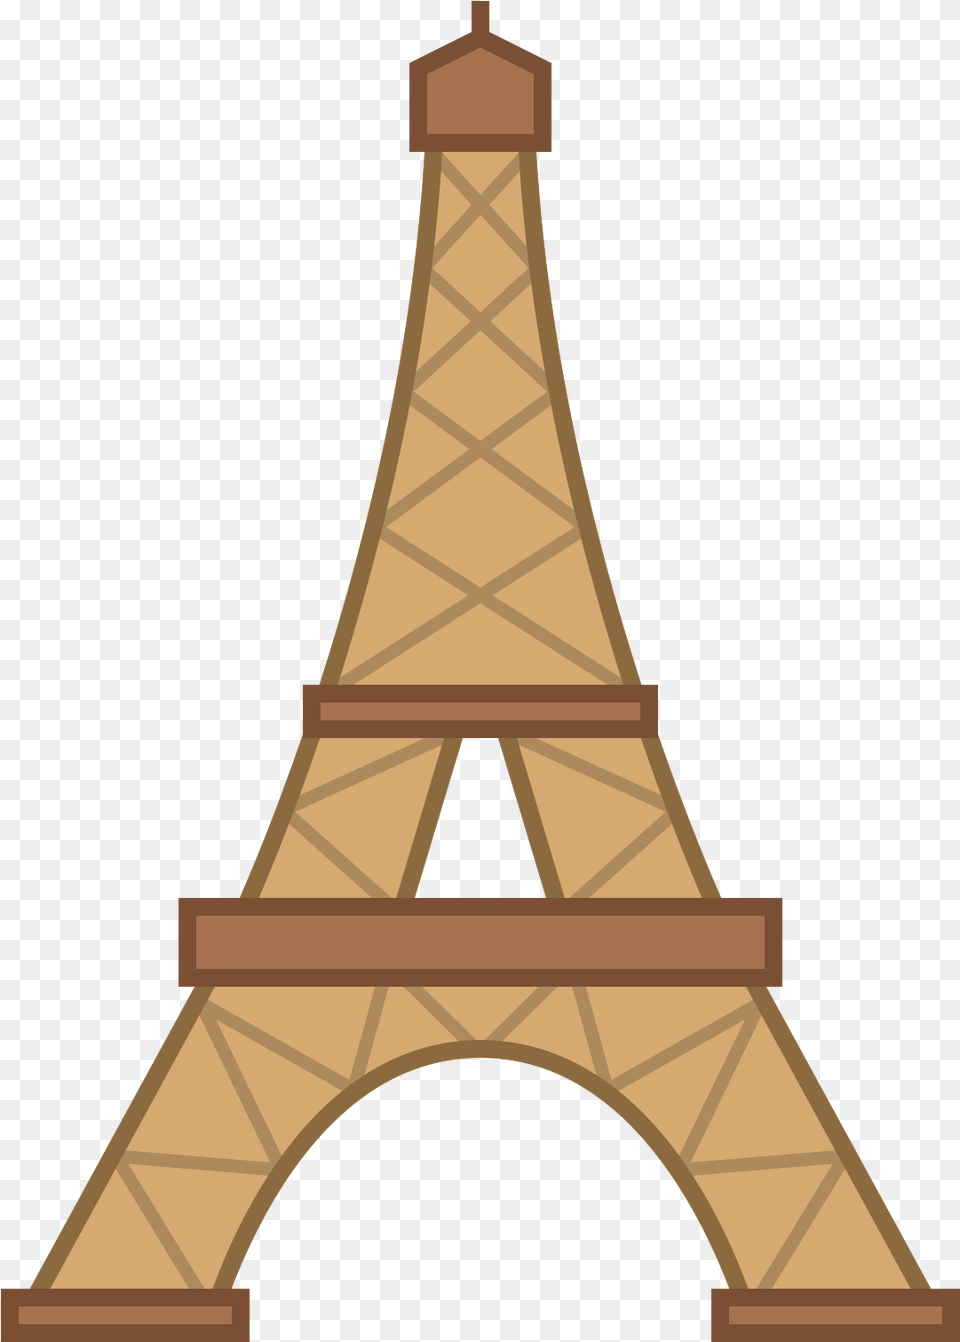 Id V 4 6 40 7 Kb Eiffel Tower In Ios Eiffel Tower Emoji, Architecture, Bell Tower, Building, Clock Tower Png